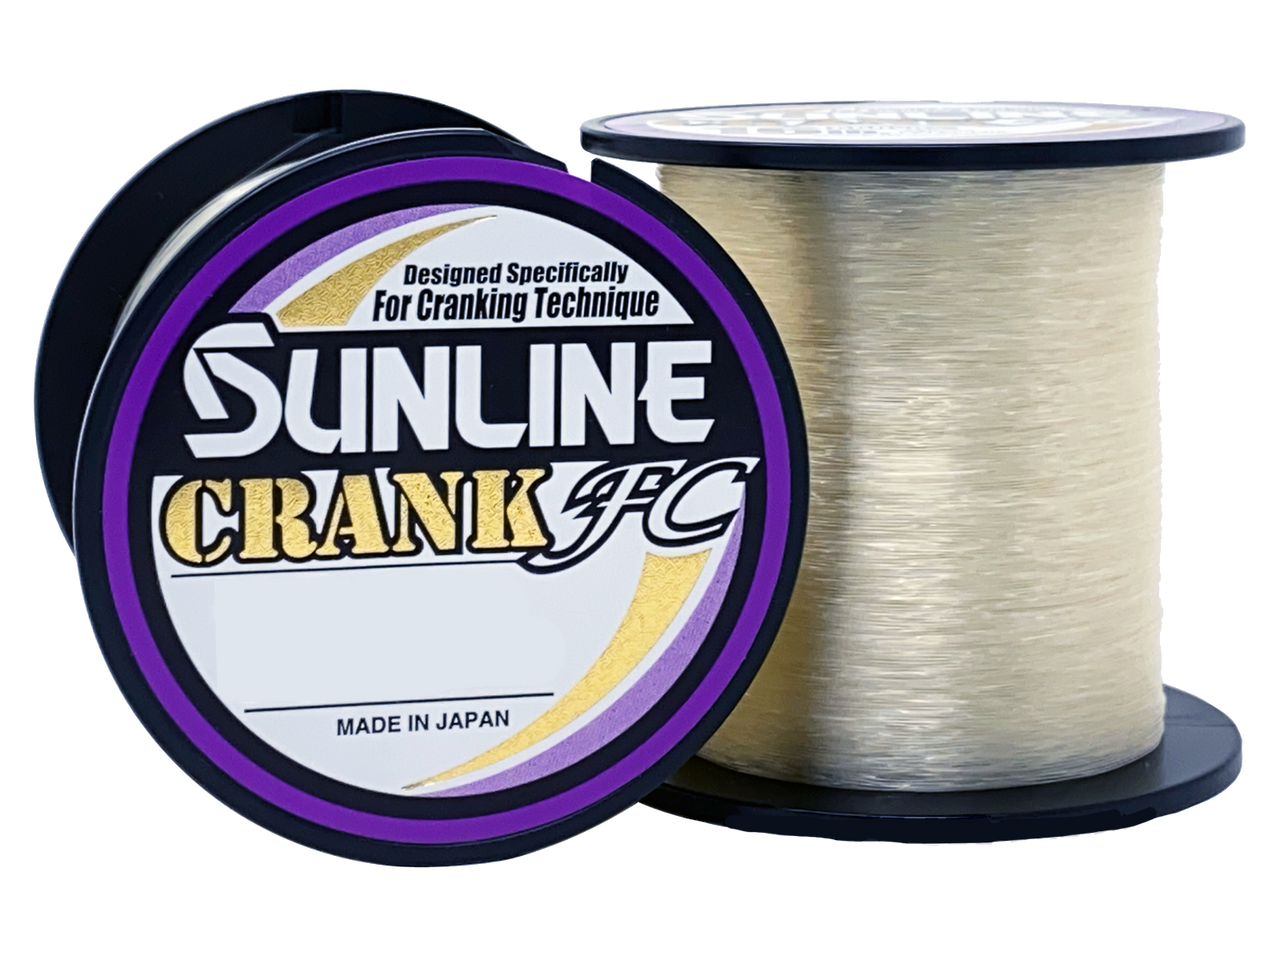 Sunline Crank FC Fluorocarbon Fishing Line Product Review